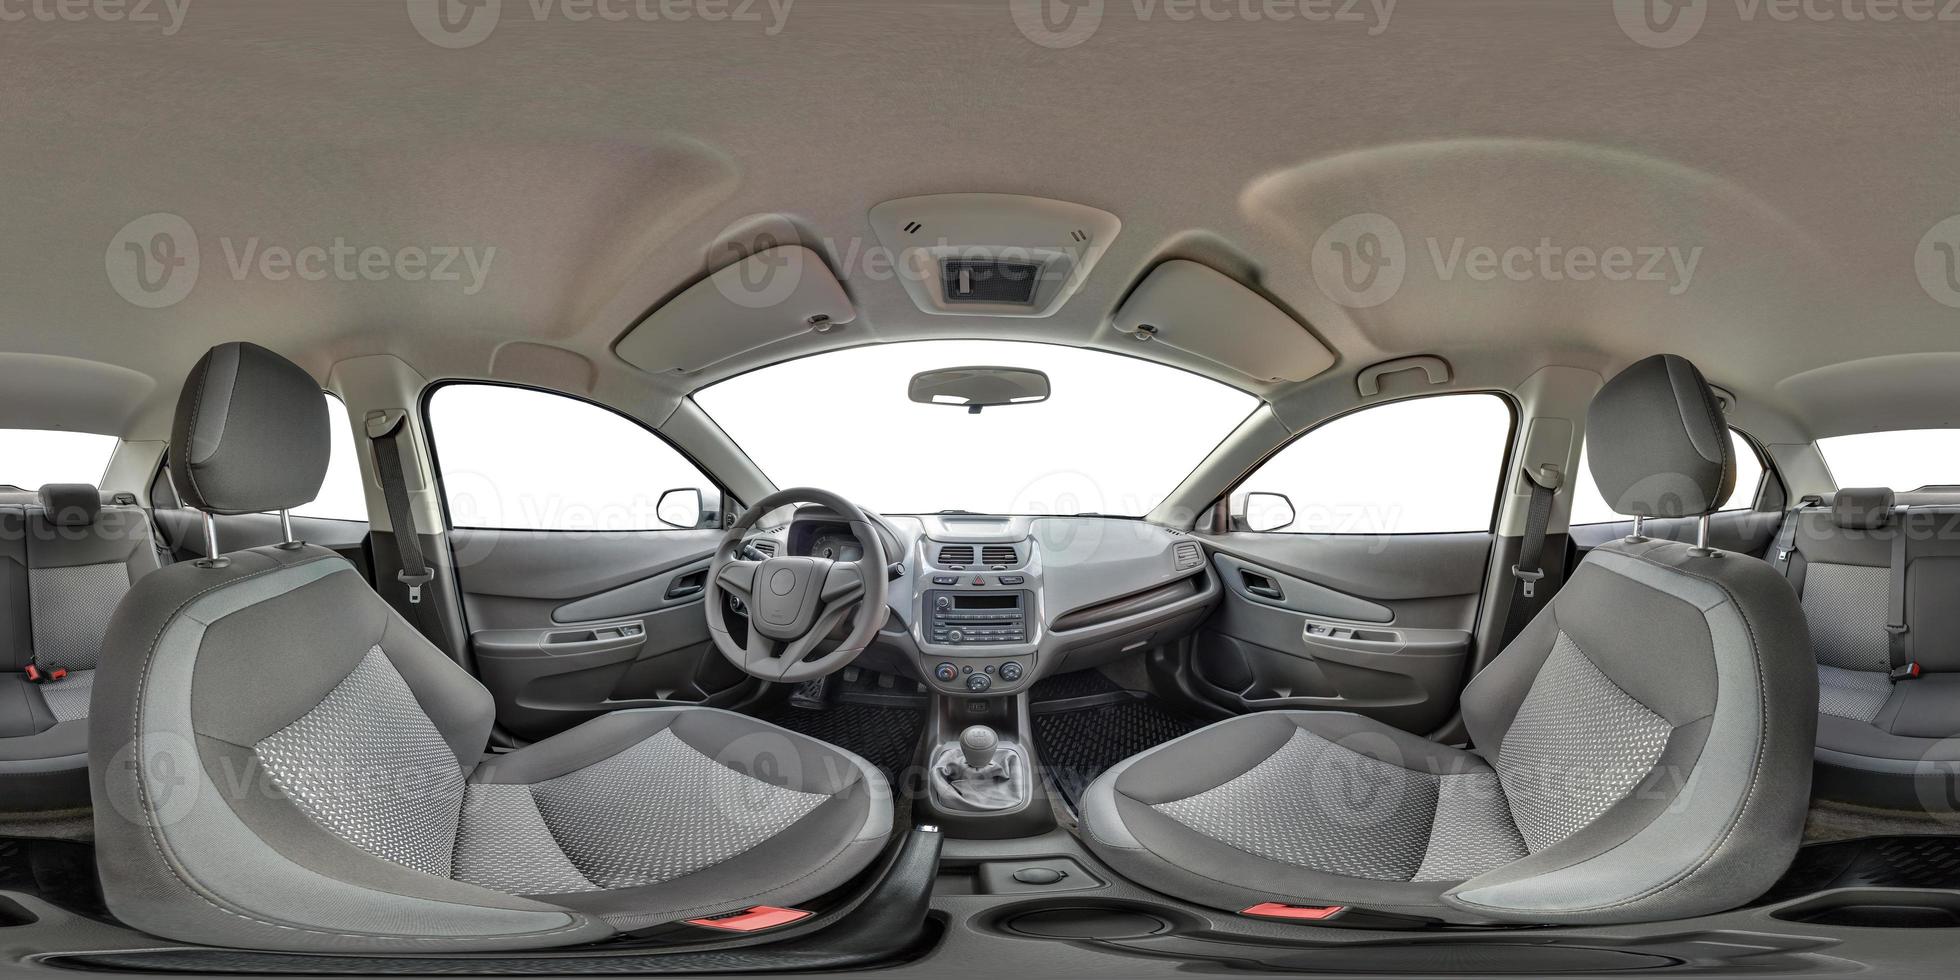 Full 360 by 180 degree seamless equirectangular equidistant spherical panorama in interior of prestige modern car Ravon white background. Skybox for vr ar content photo